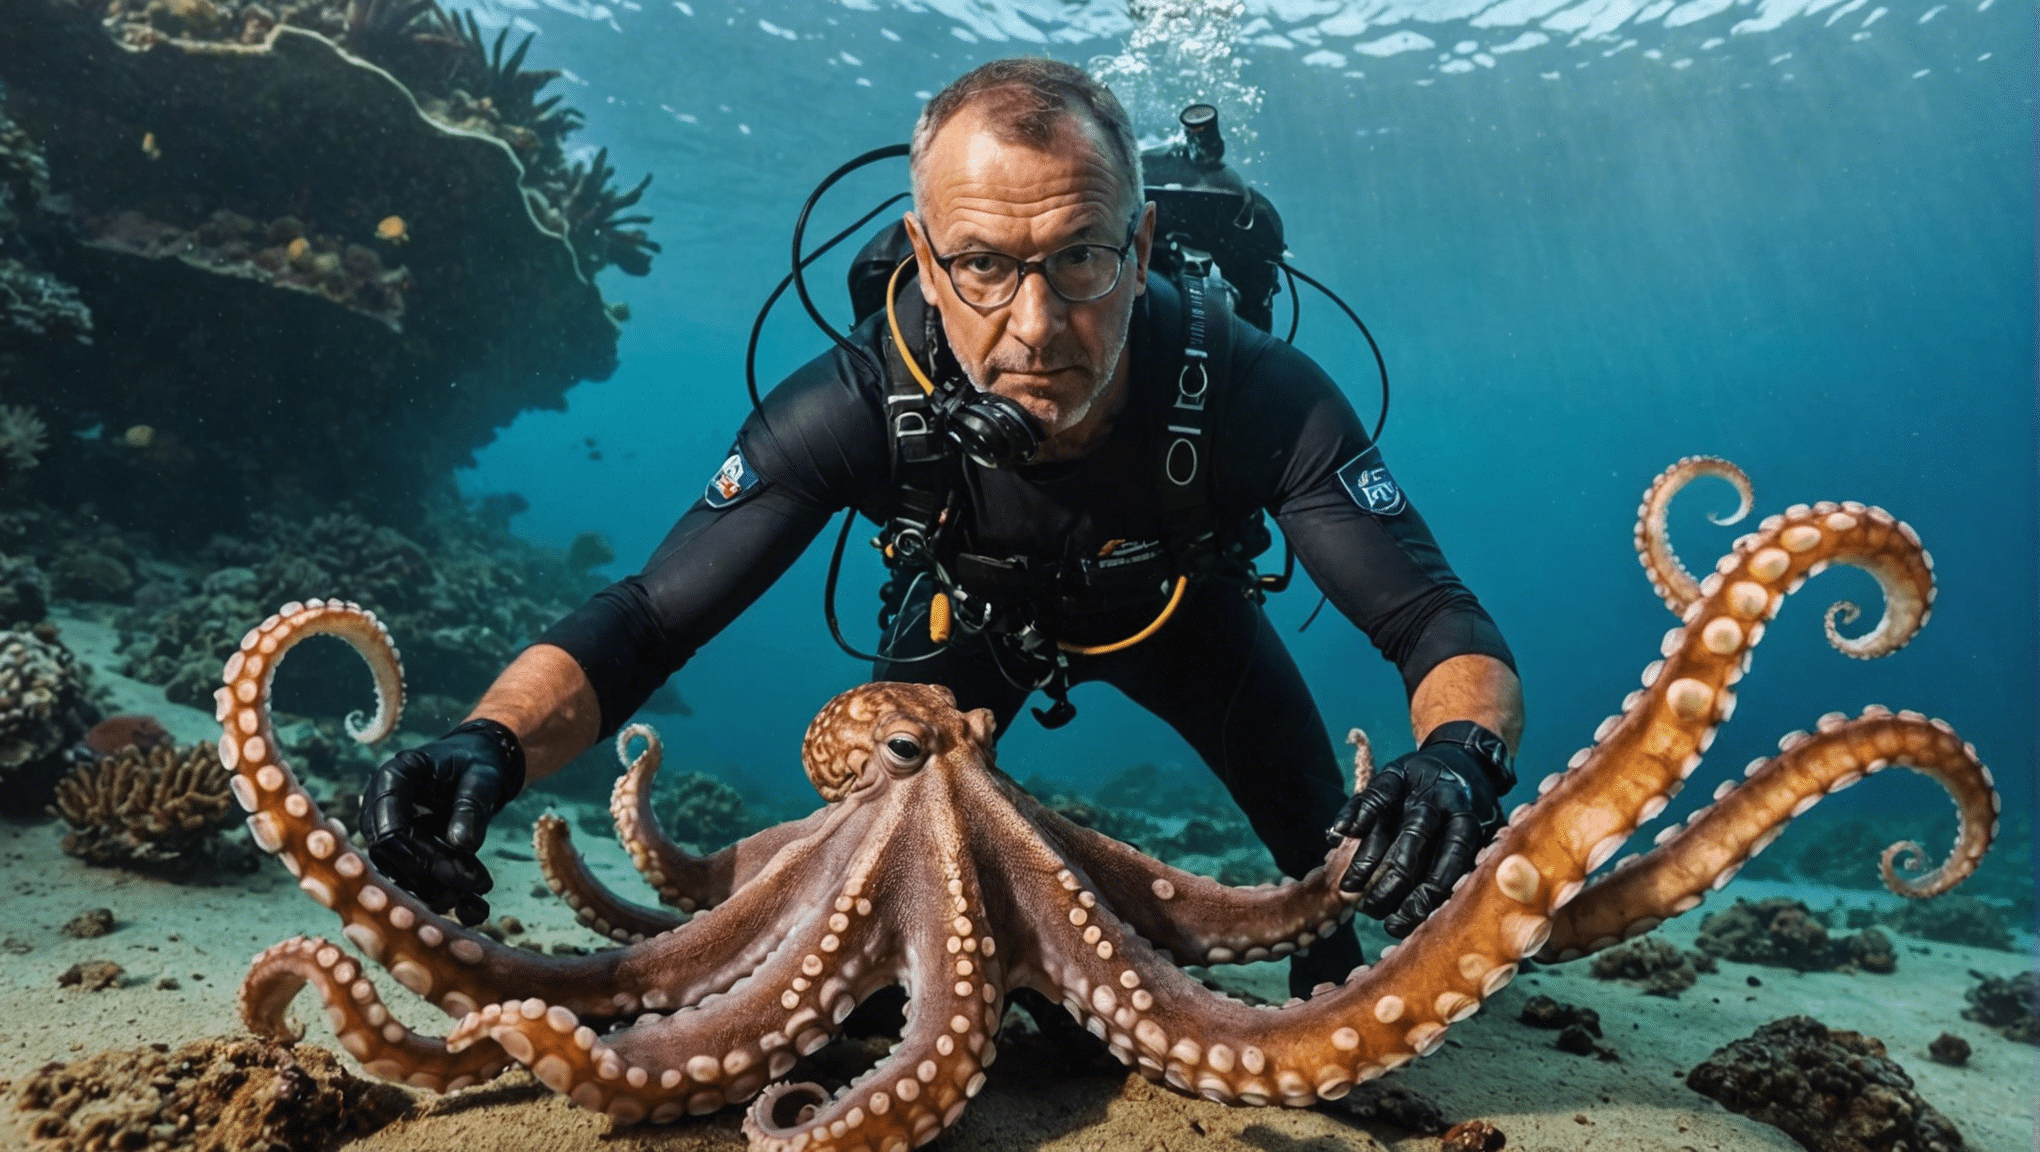 discover the internet's newest sensation: octopus dad, a rising star in the animal kingdom. learn why this remarkable creature has captured the world's attention and become the latest online obsession.